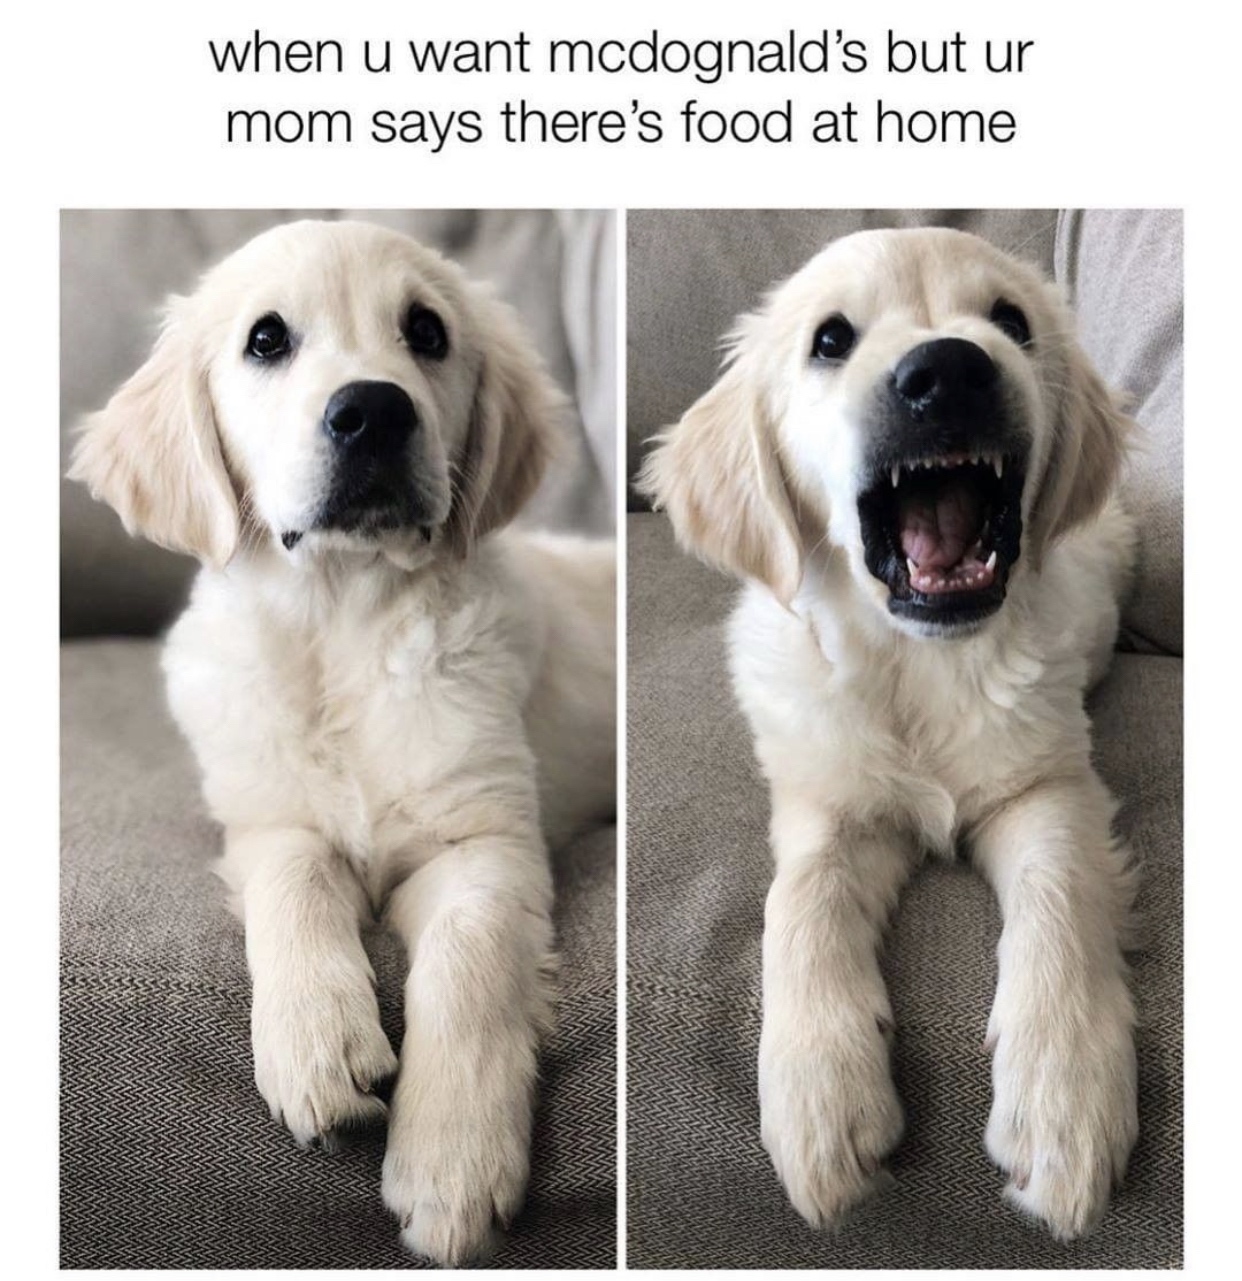 golden retriever - when u want mcdognald's but ur mom says there's food at home